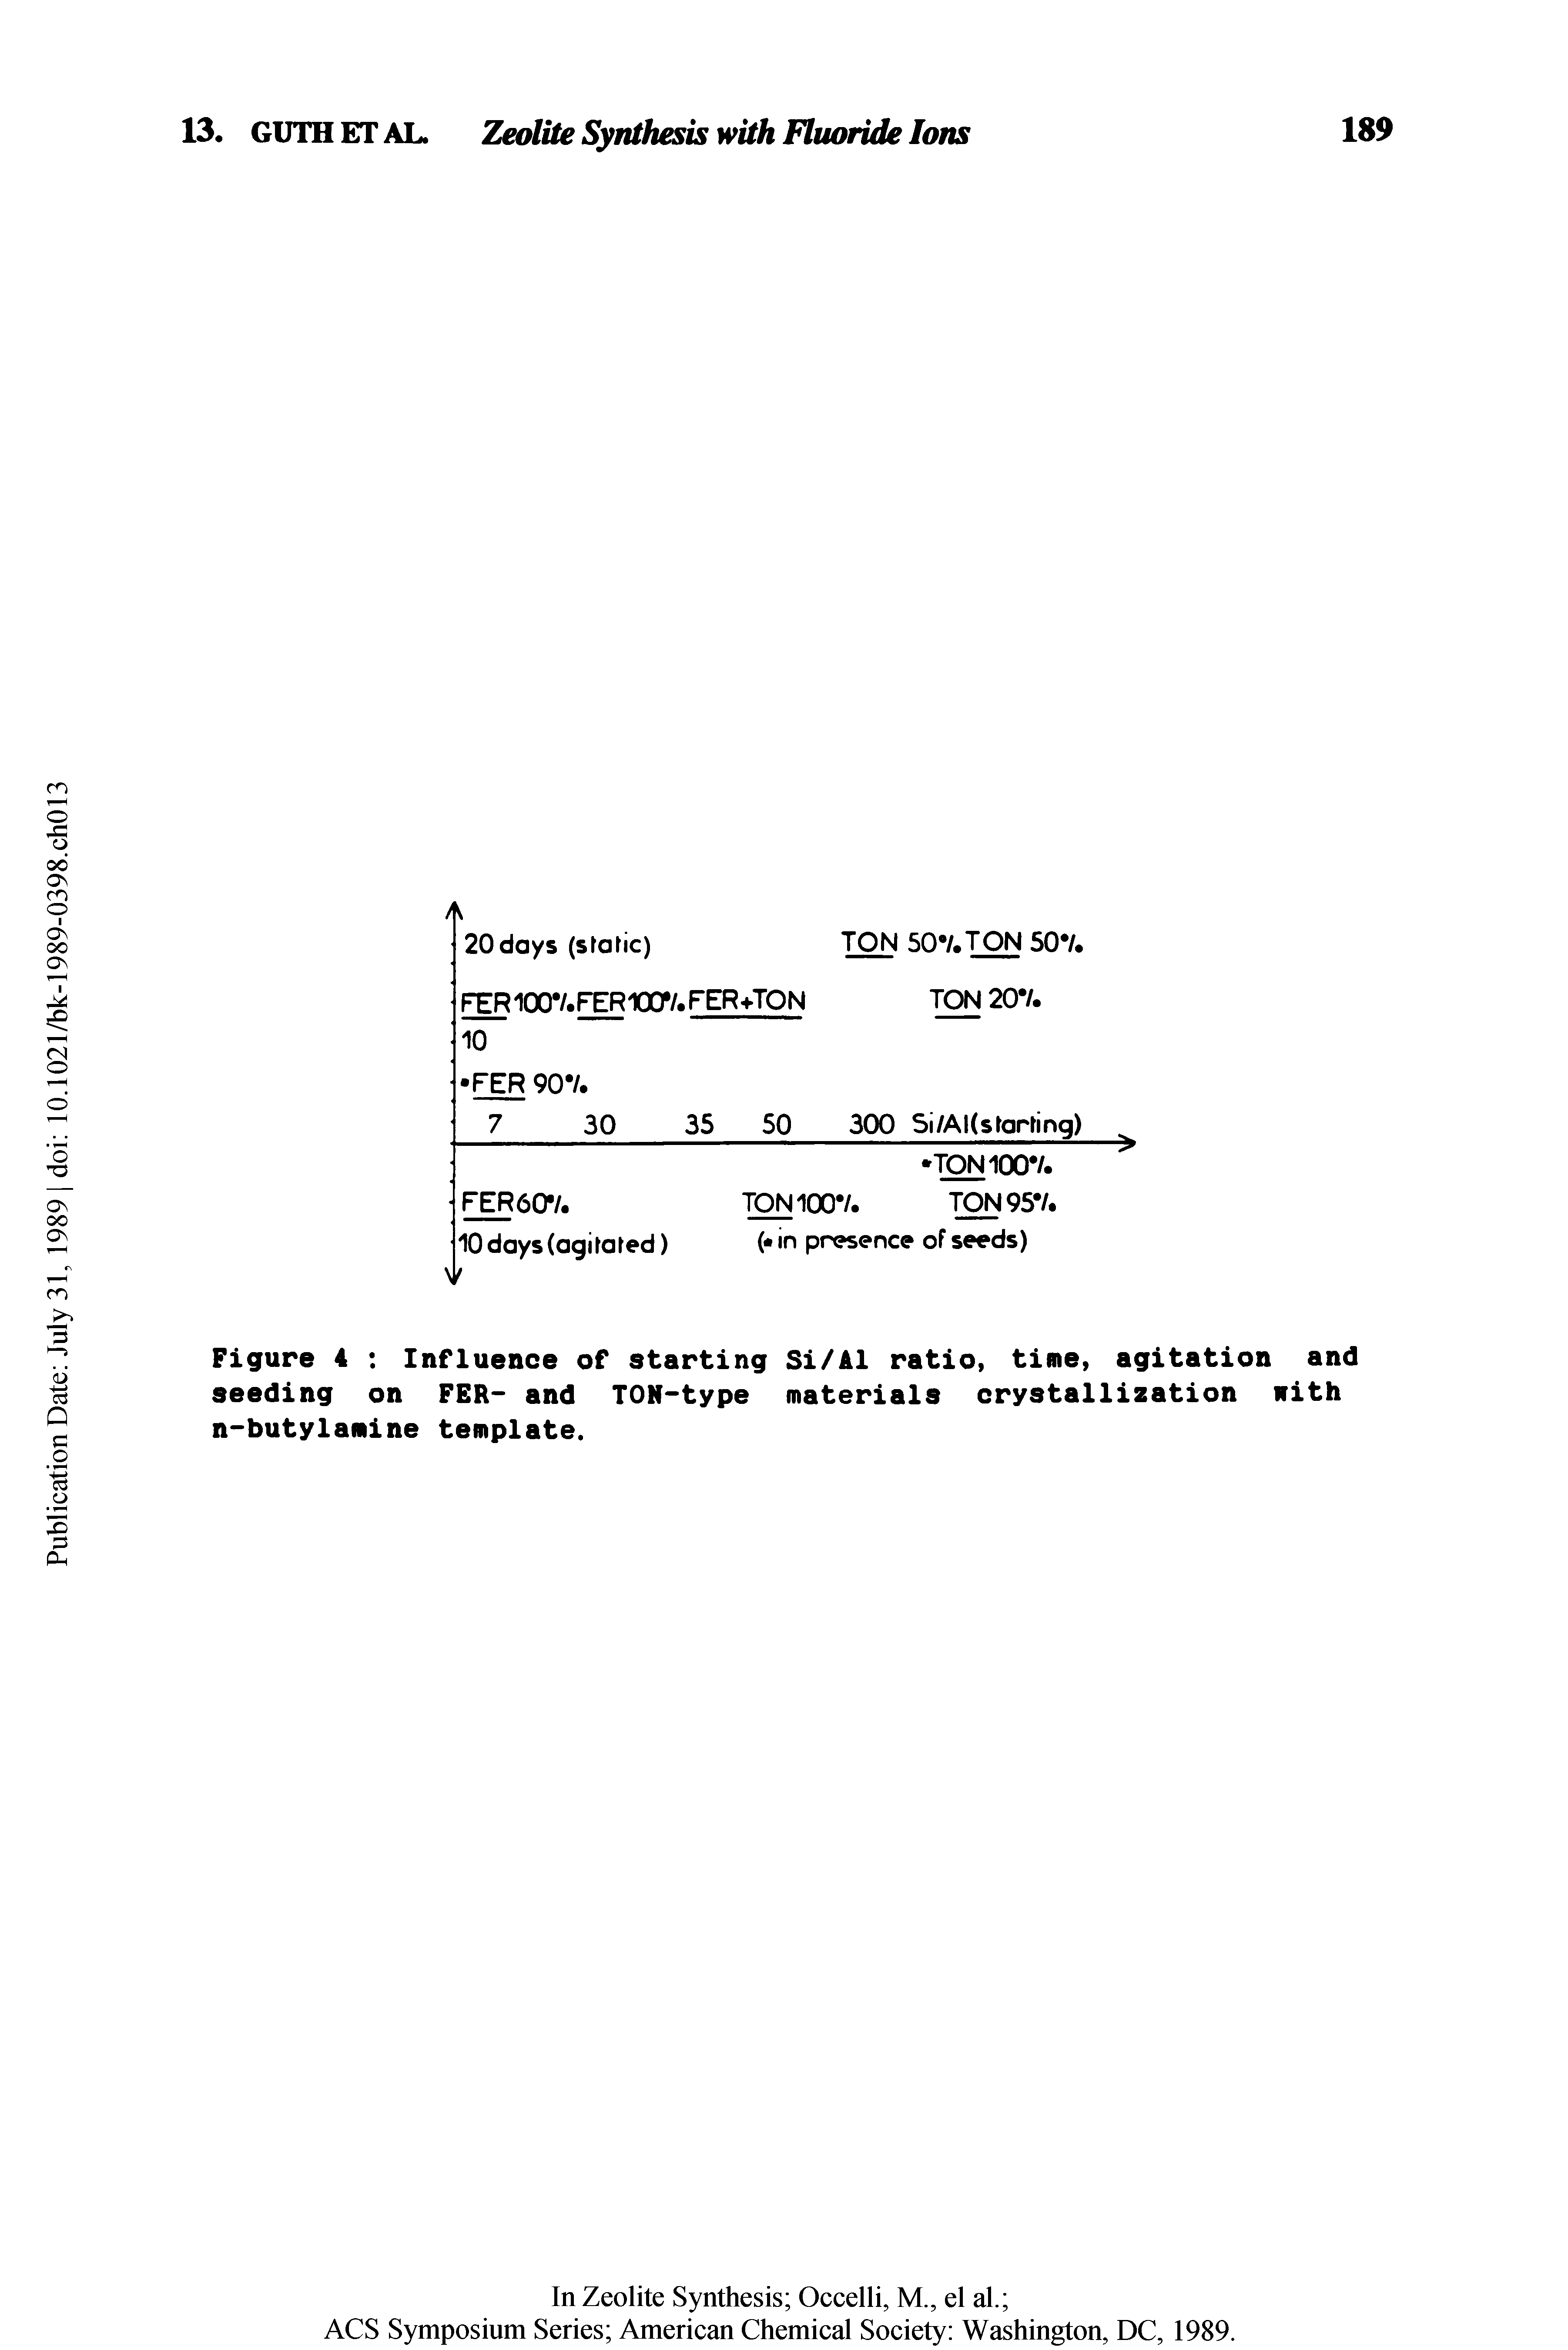 Figure 4 Influence of starting Si/Al ratio, time, agitation and seeding on FER- and TON-type materials crystallization Hith n-butylamine template.